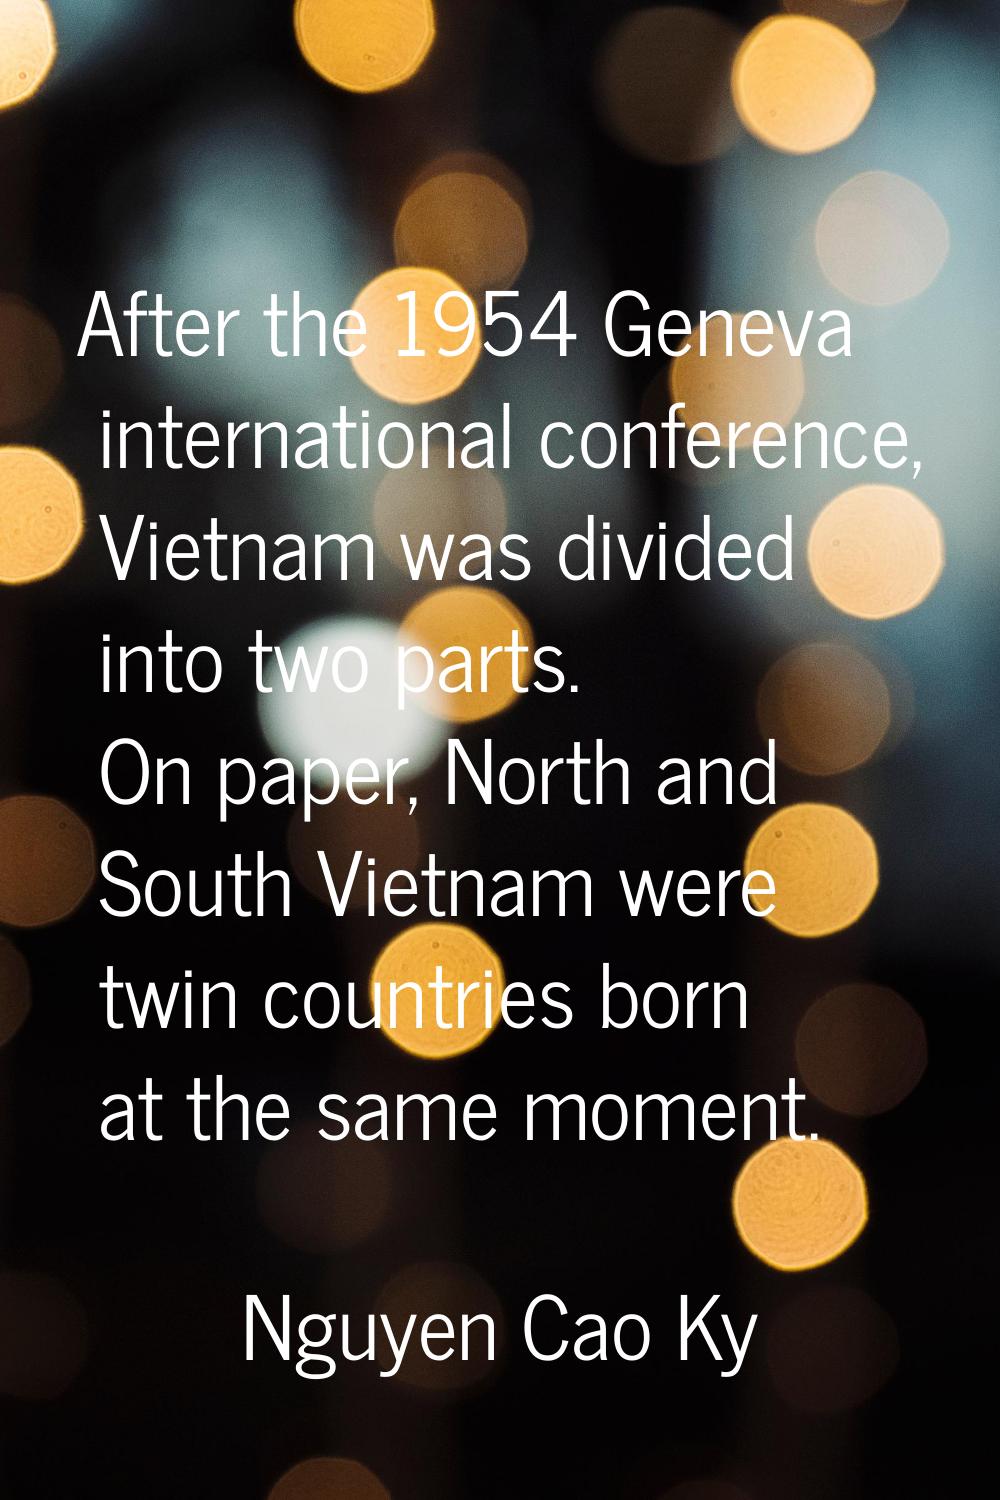 After the 1954 Geneva international conference, Vietnam was divided into two parts. On paper, North